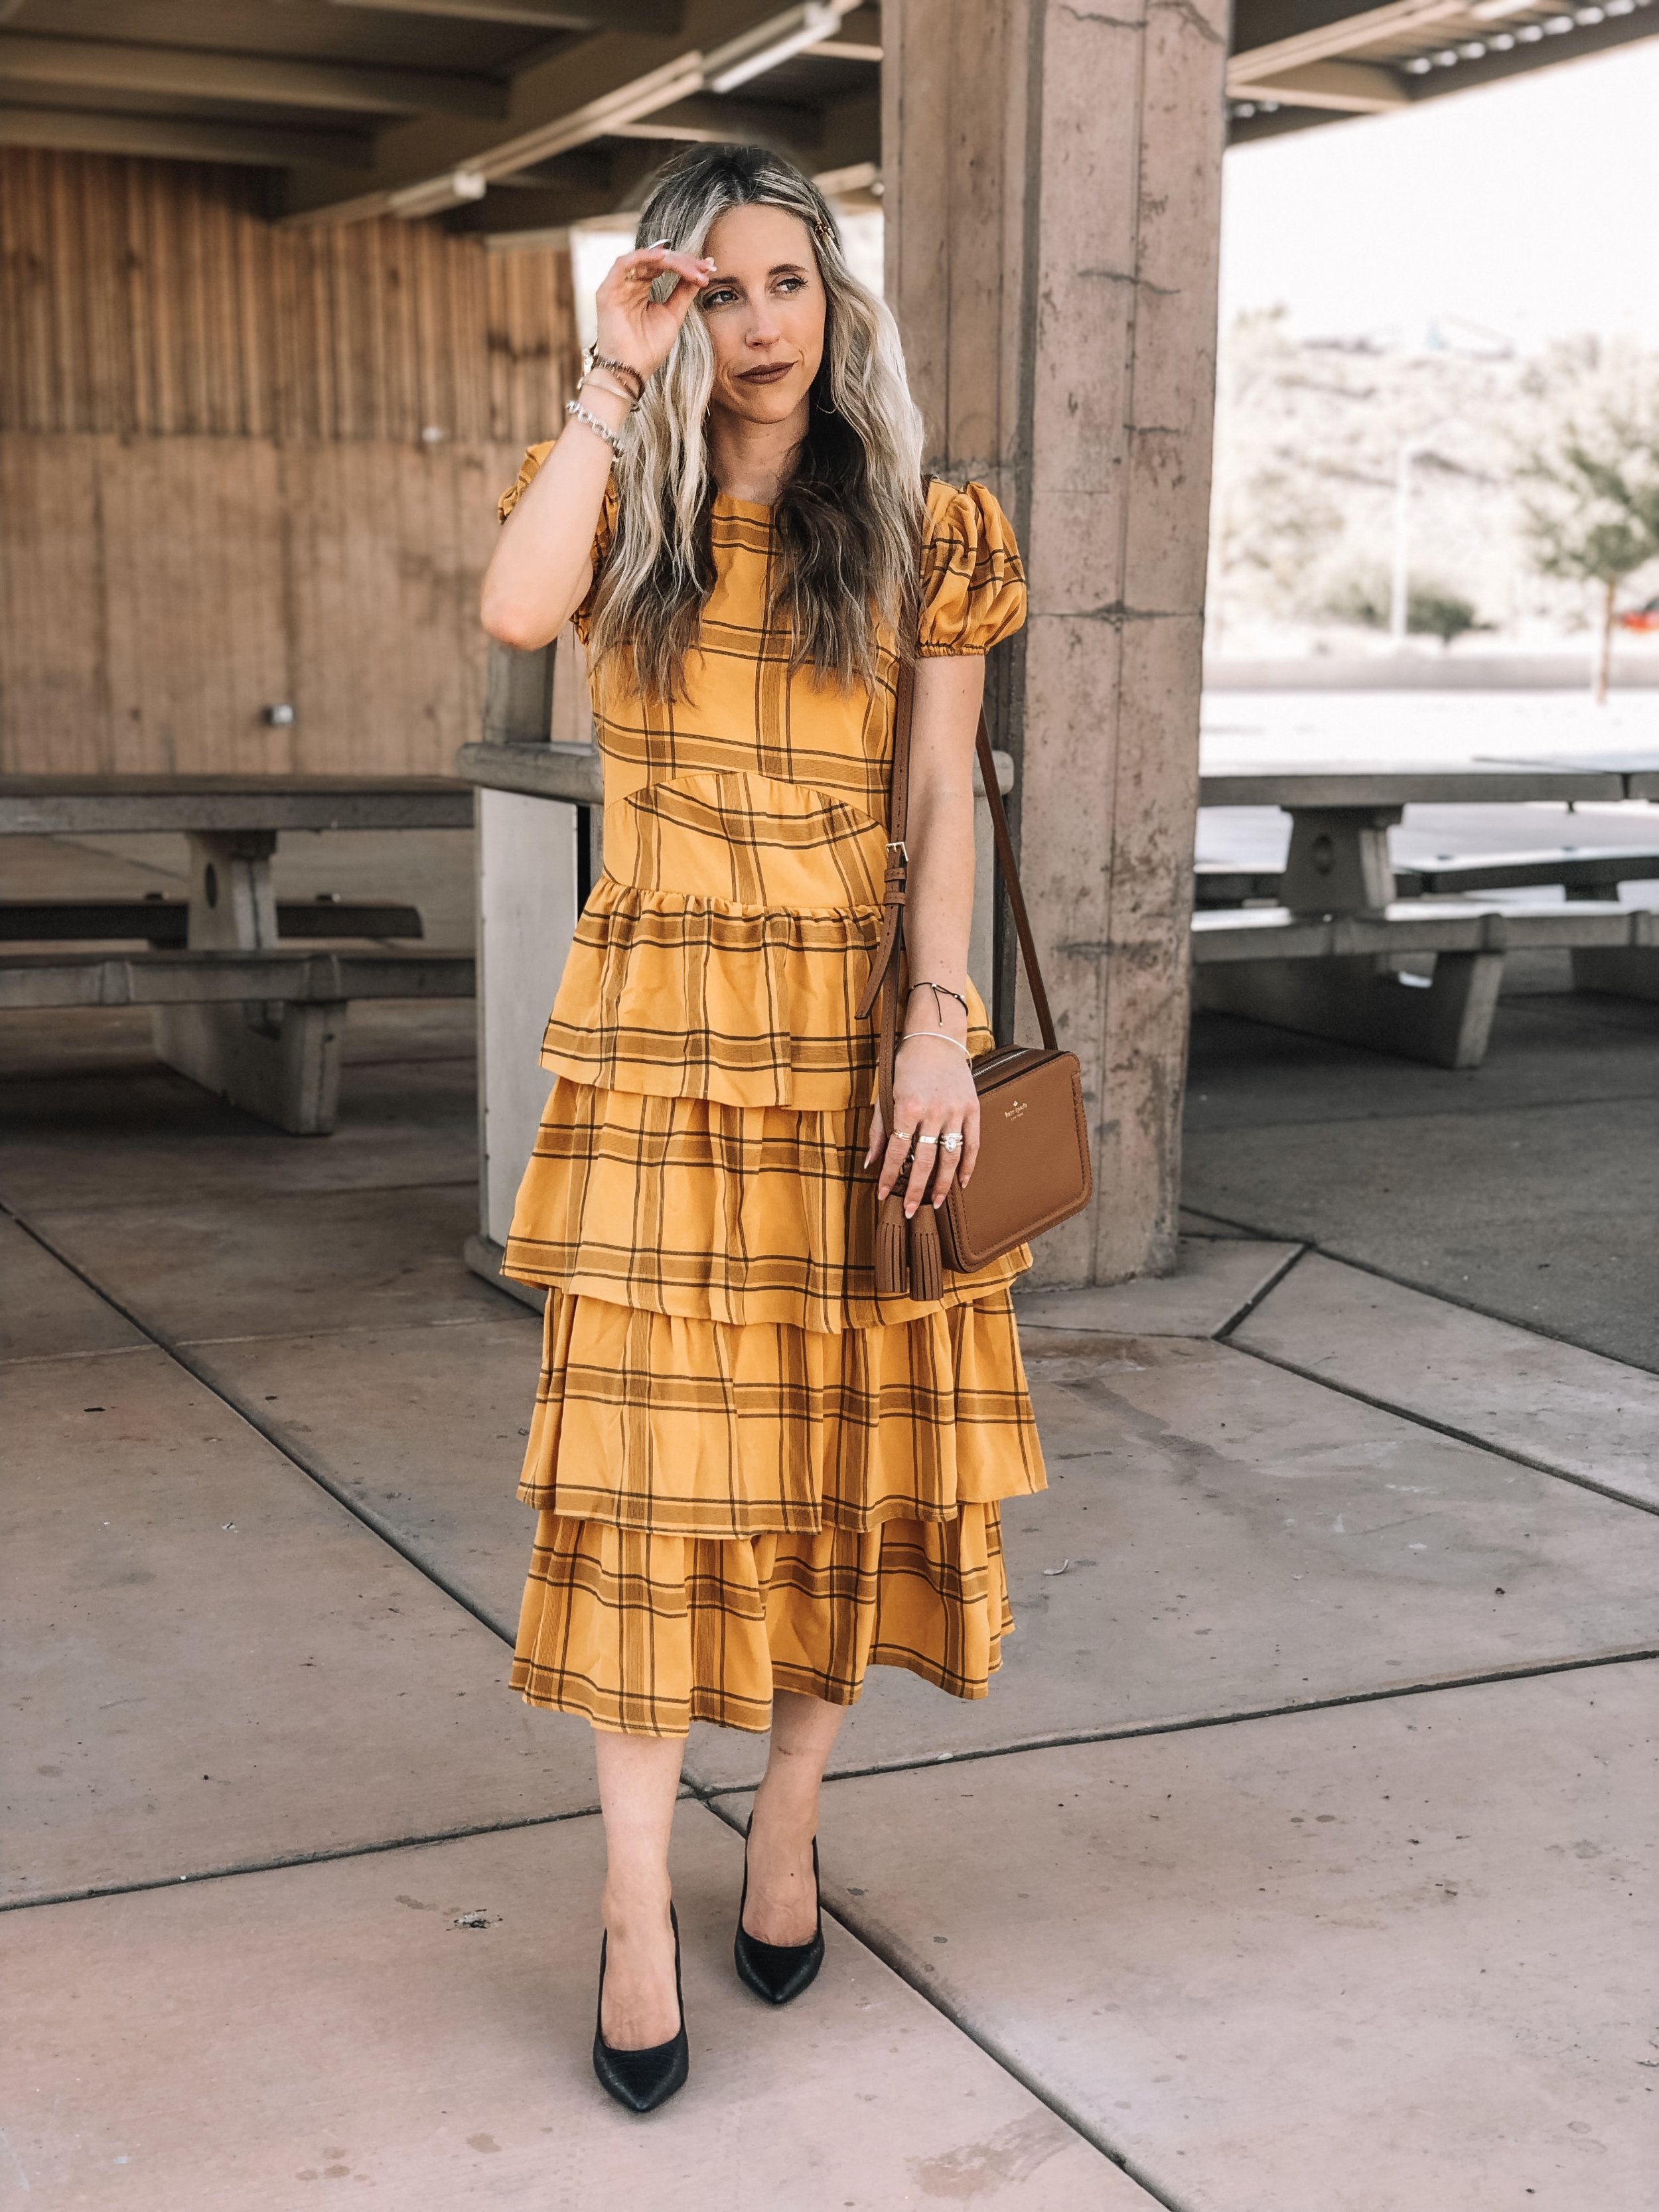 Top Las Vegas fashion blog, Life of a Sister, features their Favorite Fall Fashion from Las Vegas Premium Outlets North.